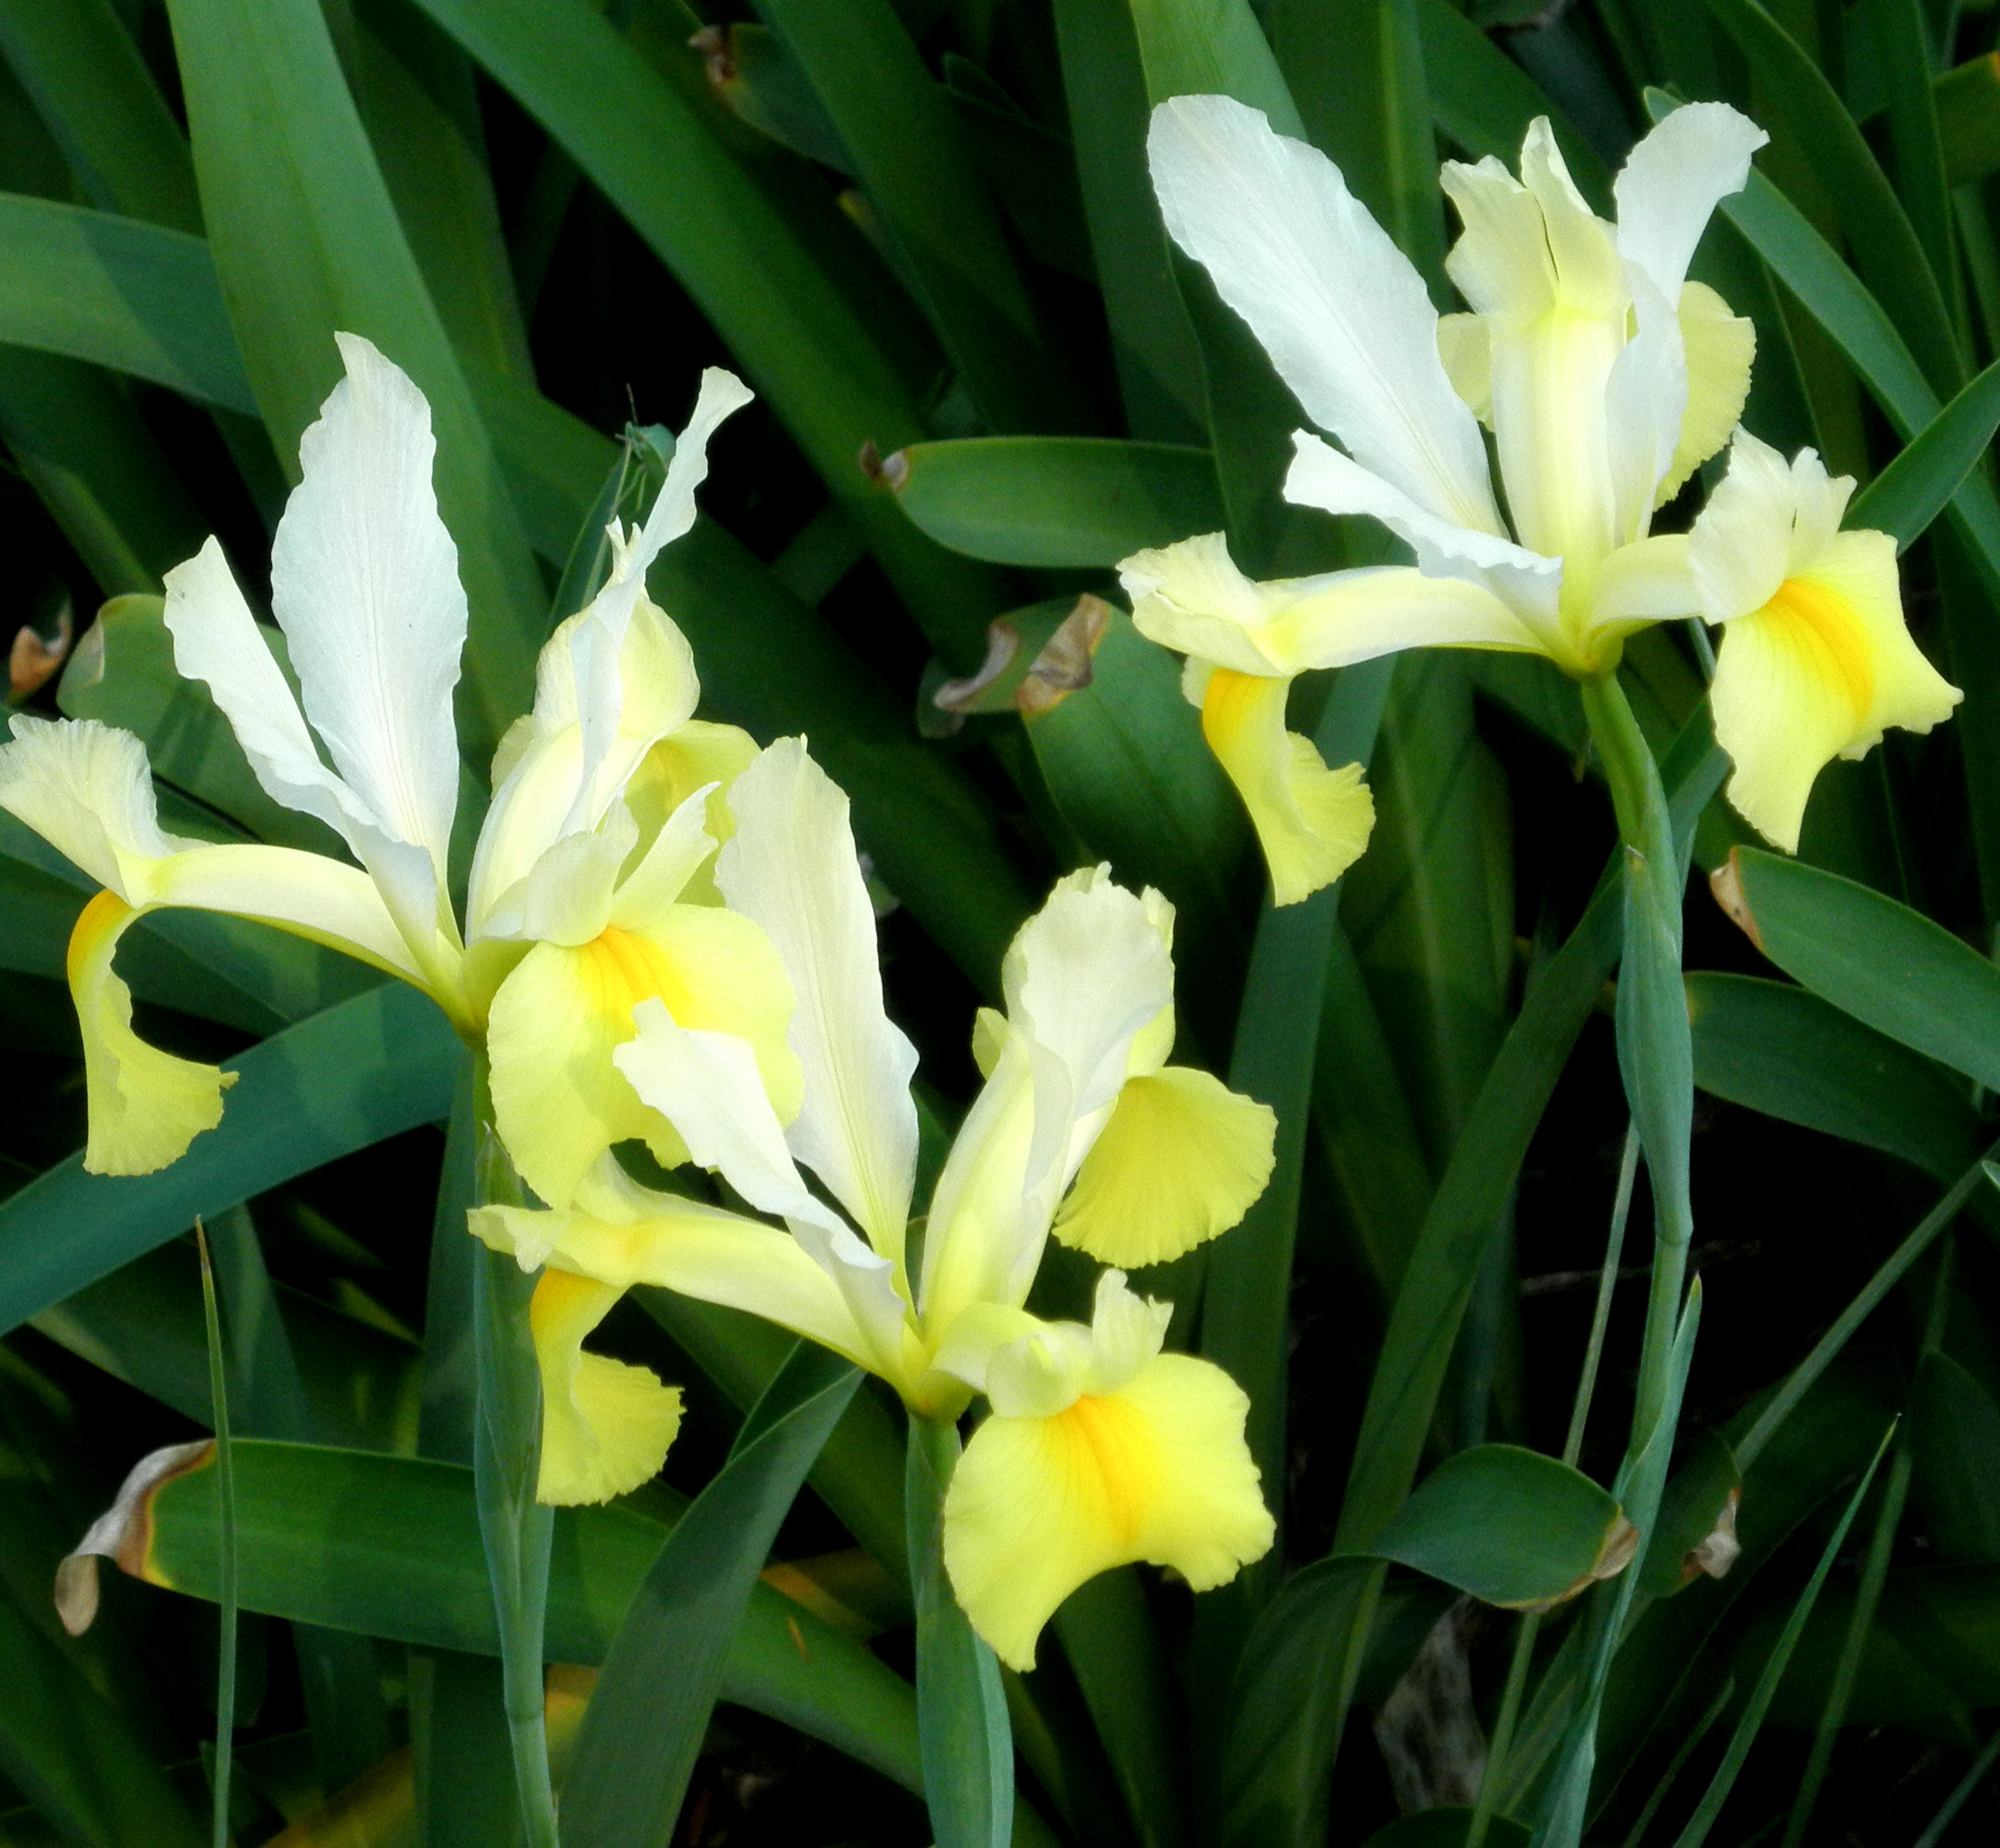 yellow20iris - *(How to Avoid Conflict With A Dose of Curiosity)*